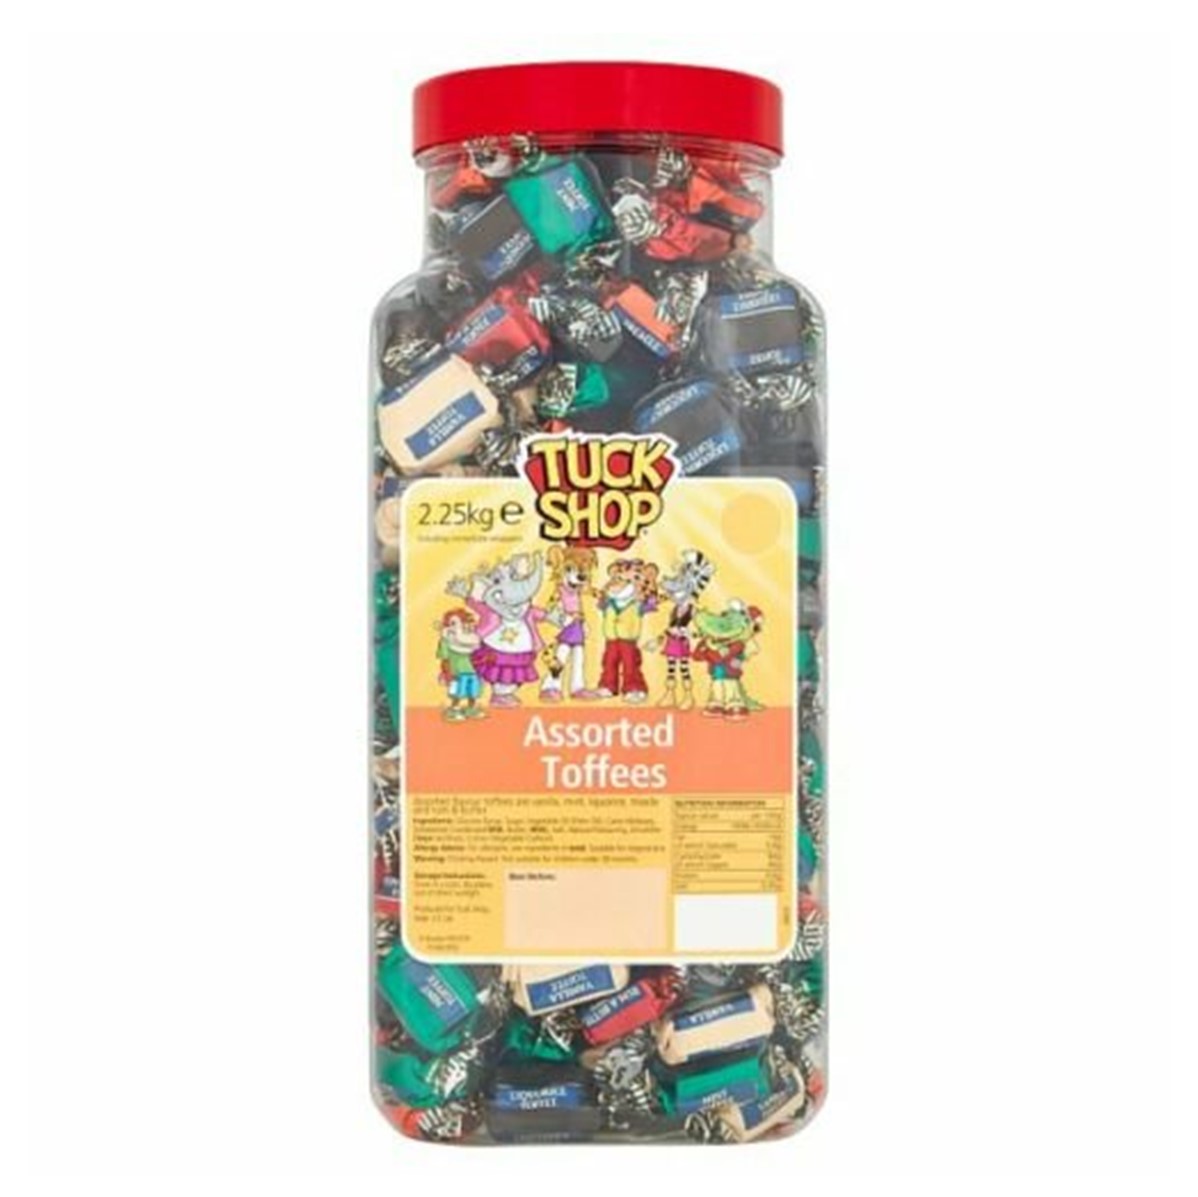 Tuck Shop Toffee Assortment [Wrapped] - 2.25kg jar